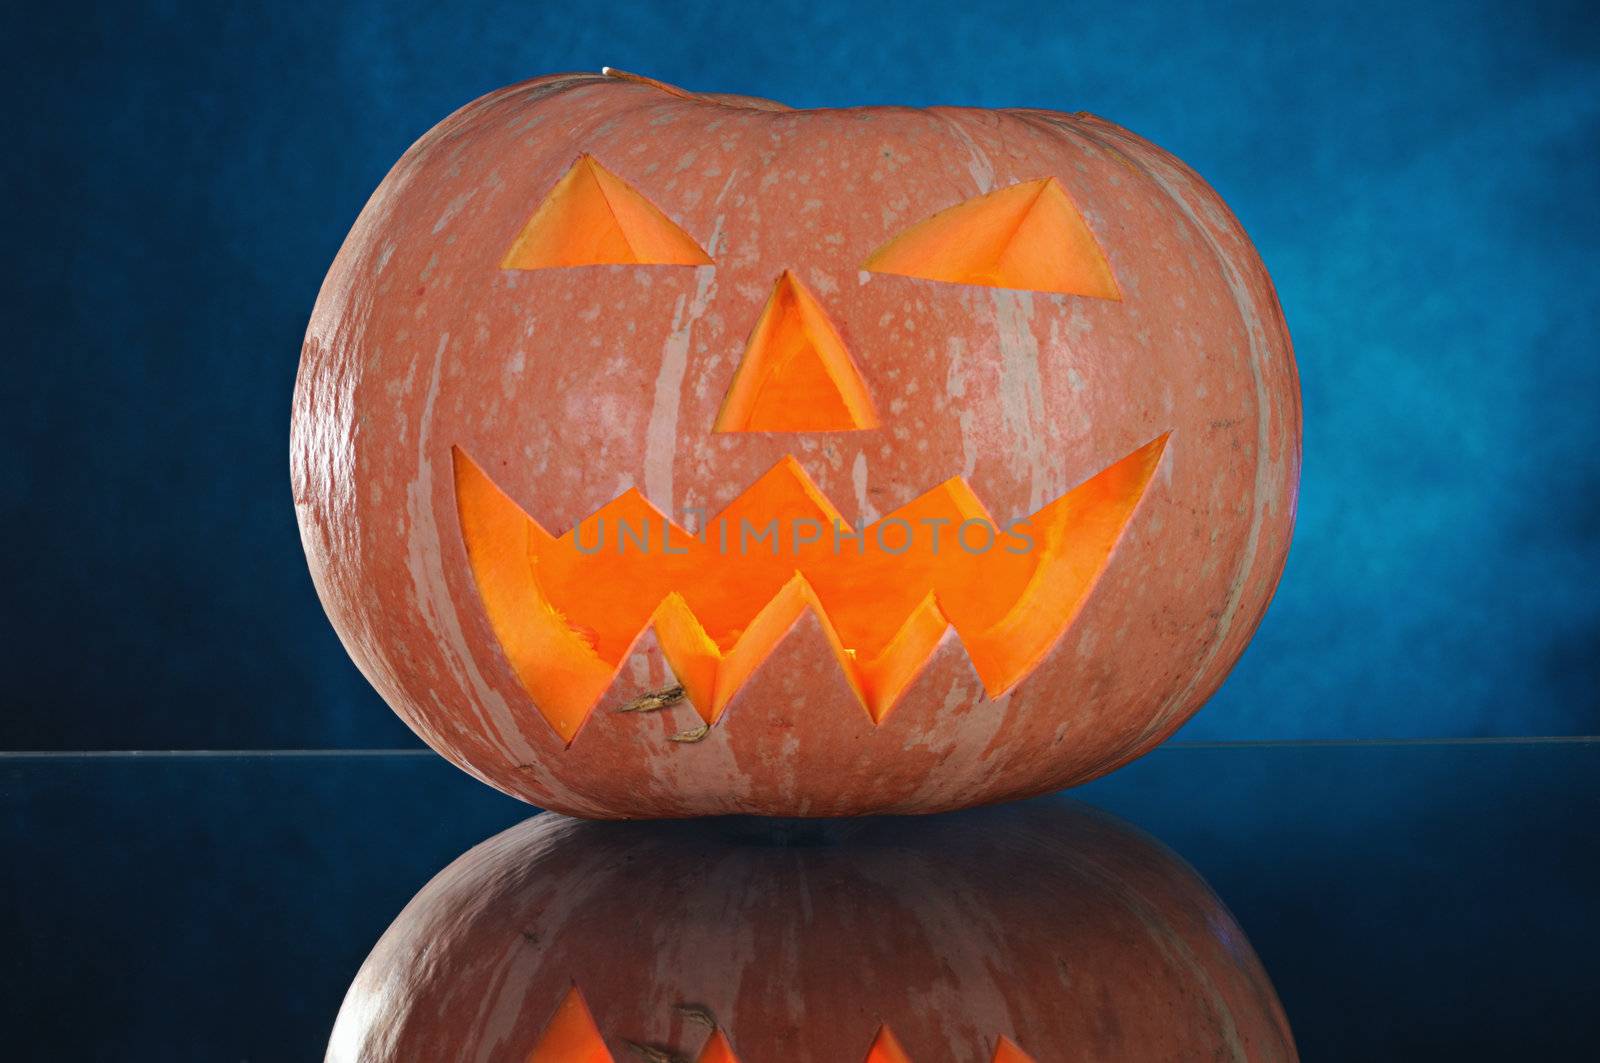  pumpkin with lighting candle inside on blue background